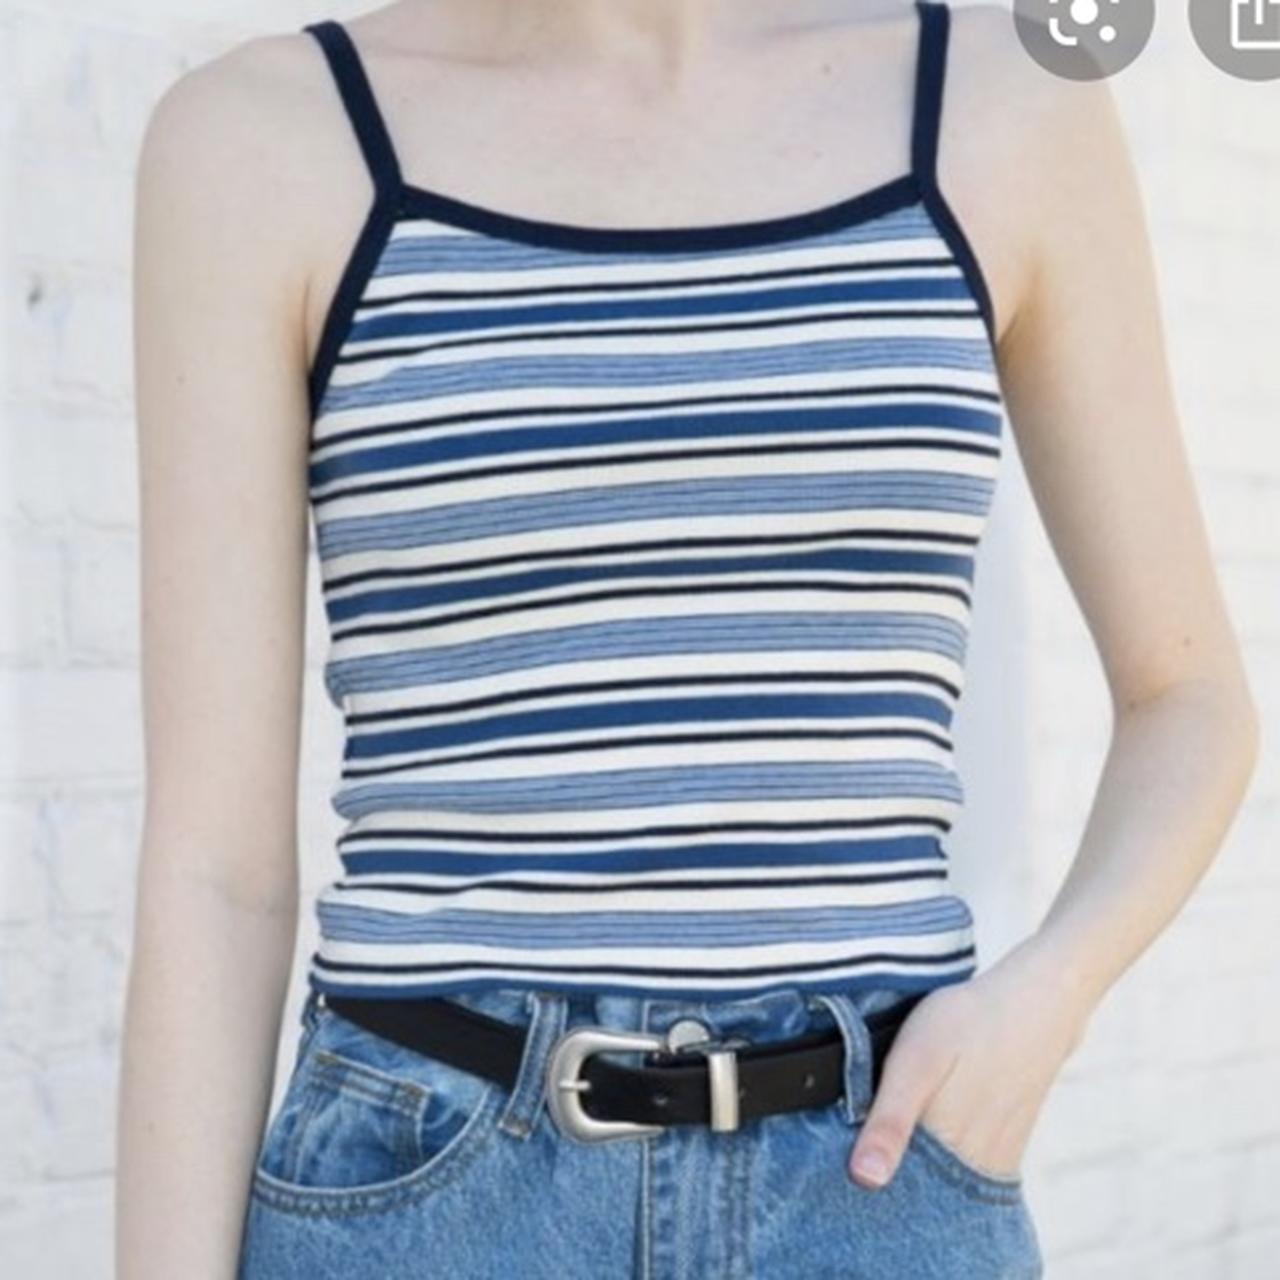 New! brandy melville crop multi colors striped Belle tank top NWT